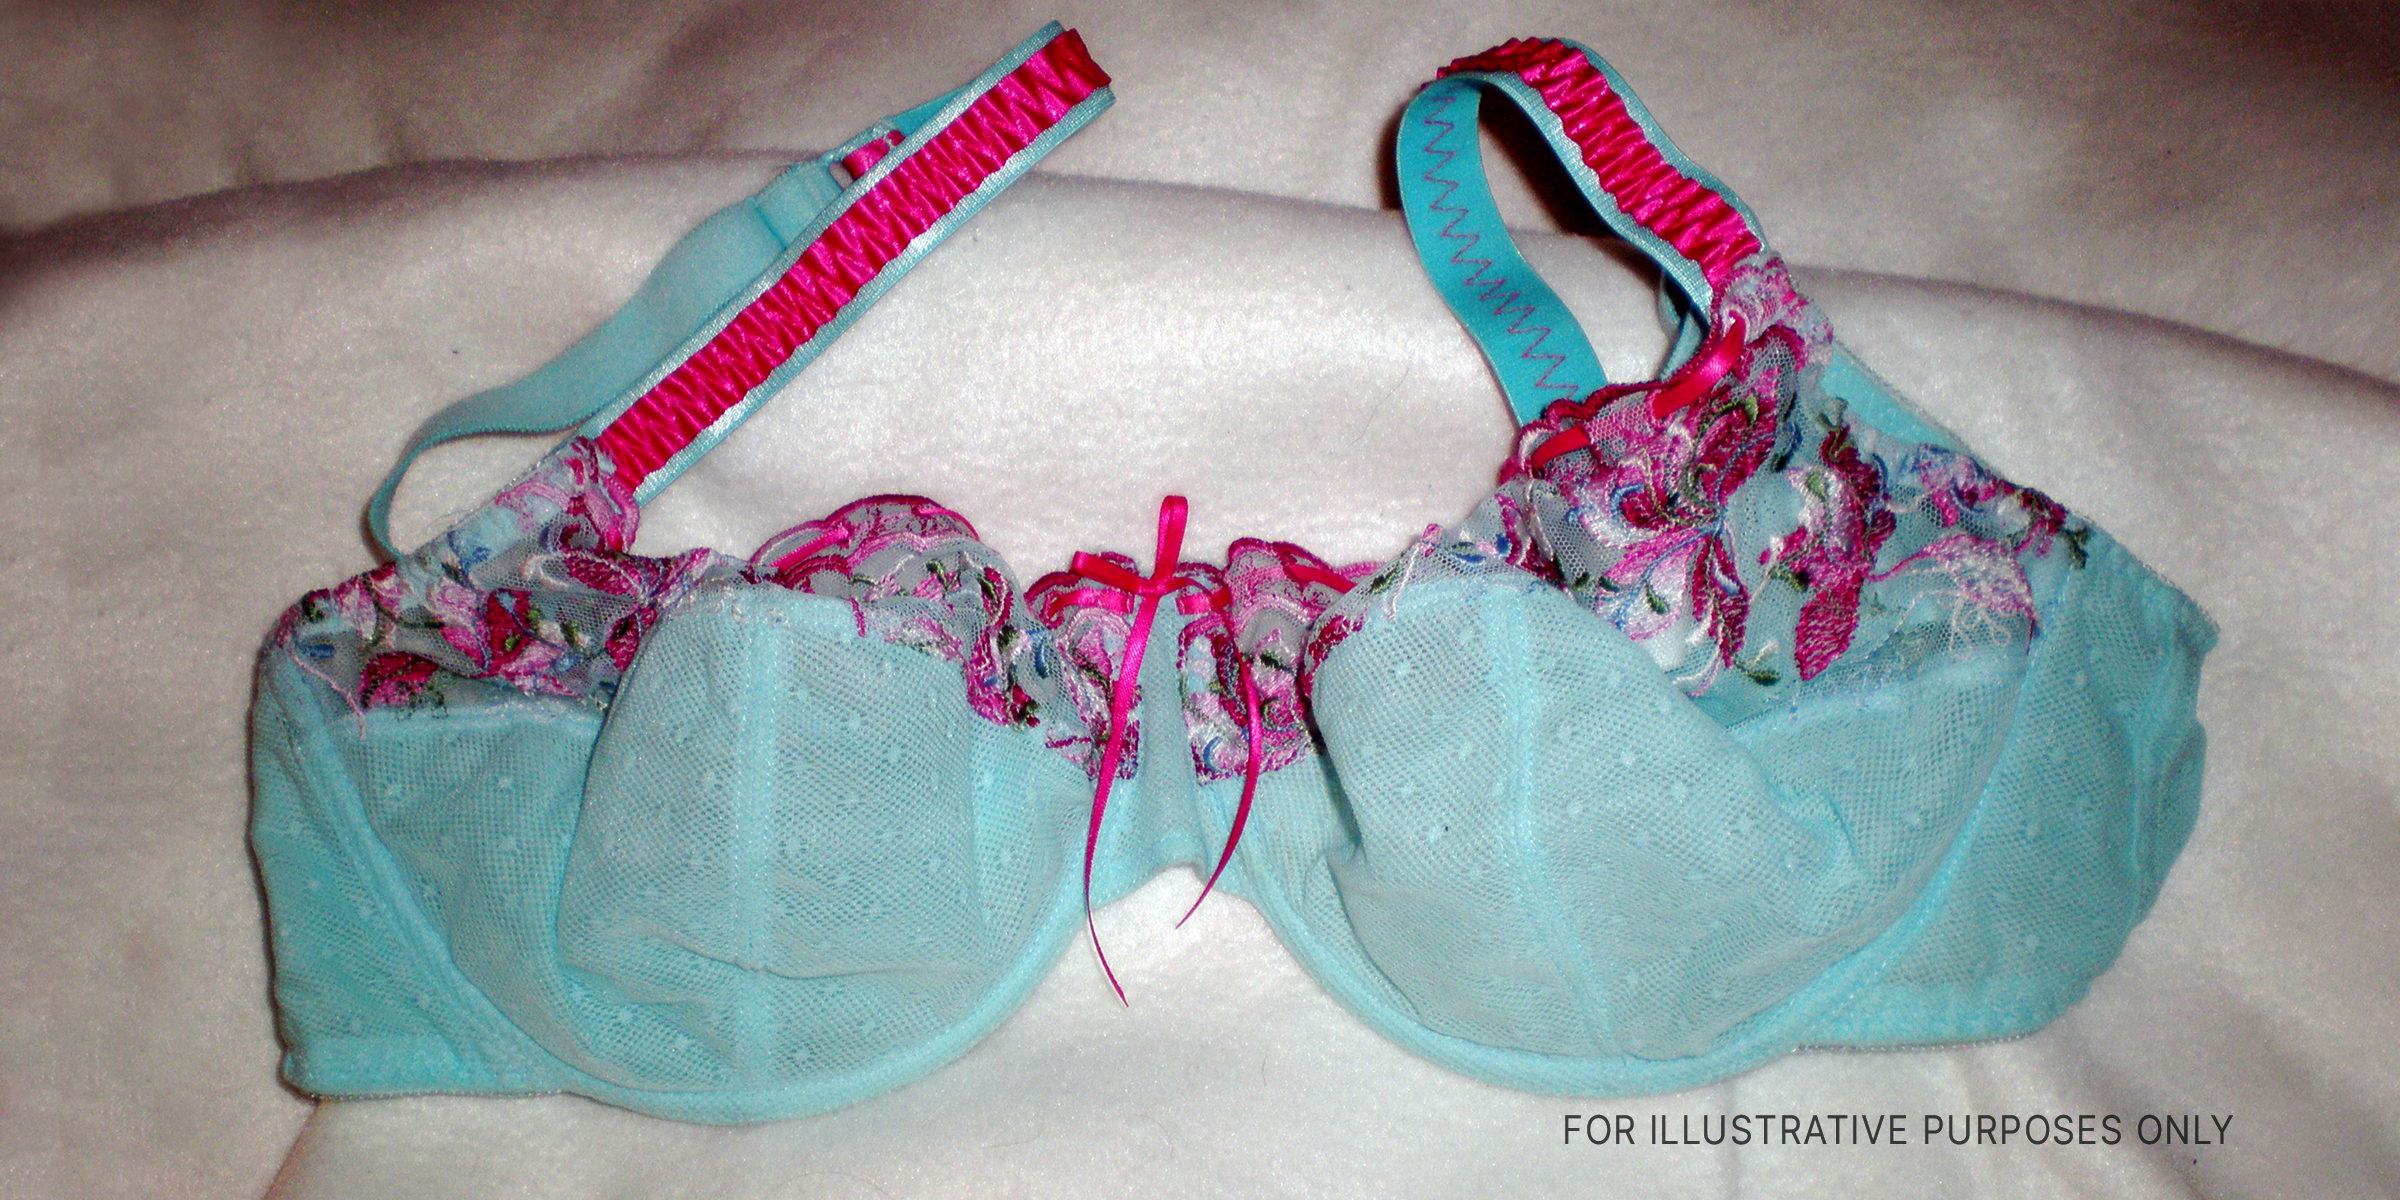 Light blue bra with pink accents. | Source: Flickr / outofmytree (CC BY-SA 2.0)